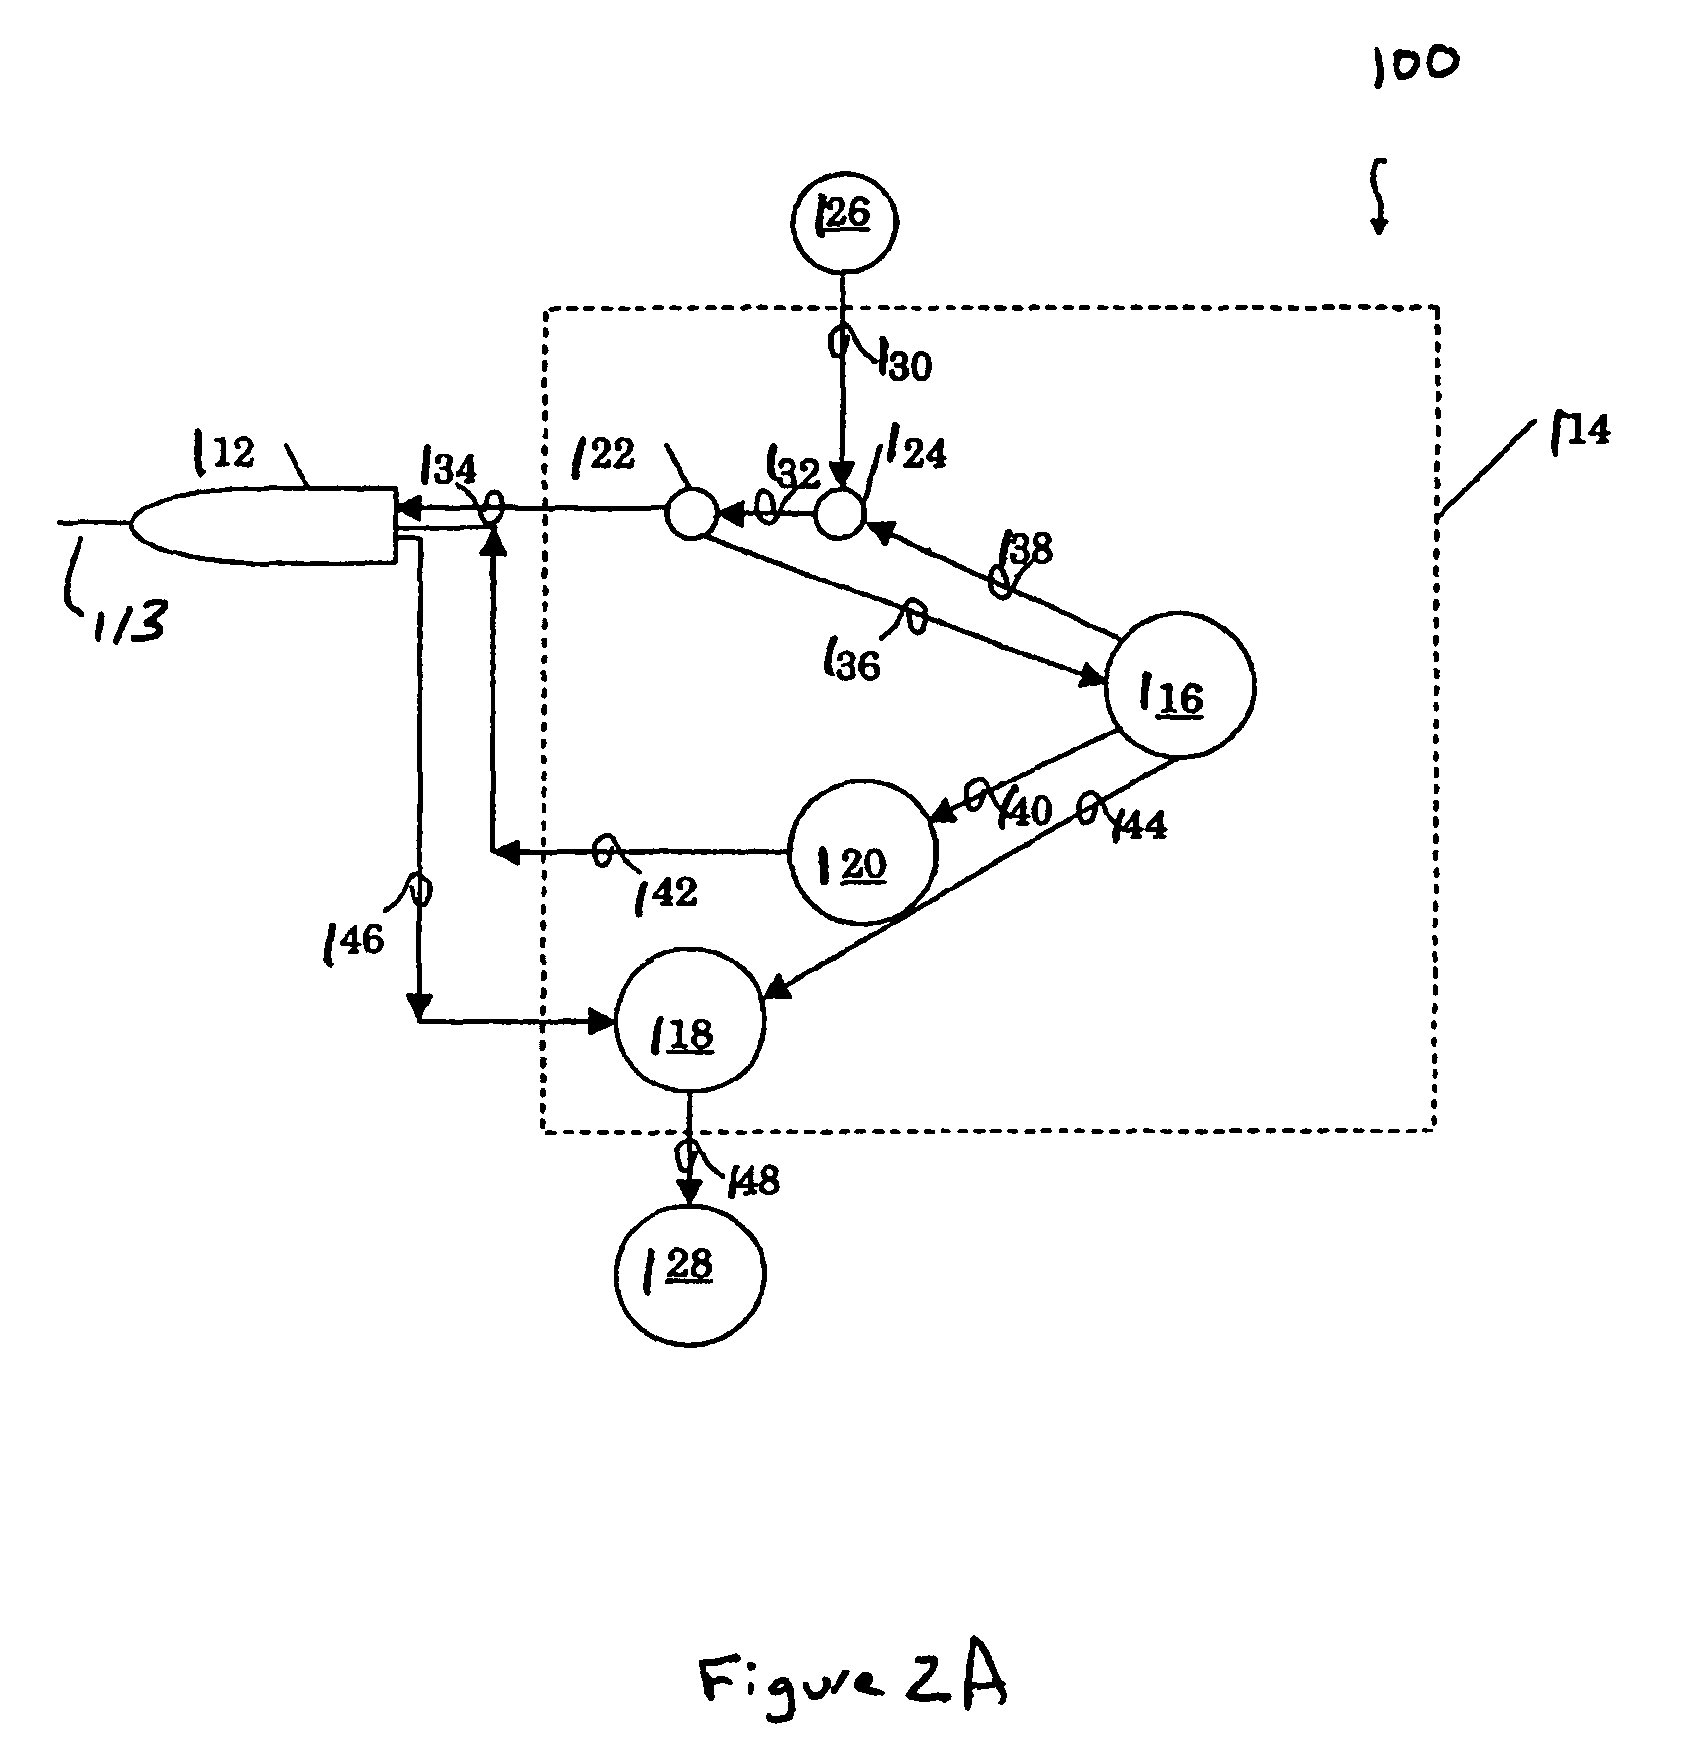 Pulse manipulation for controlling a phacoemulsification surgical system